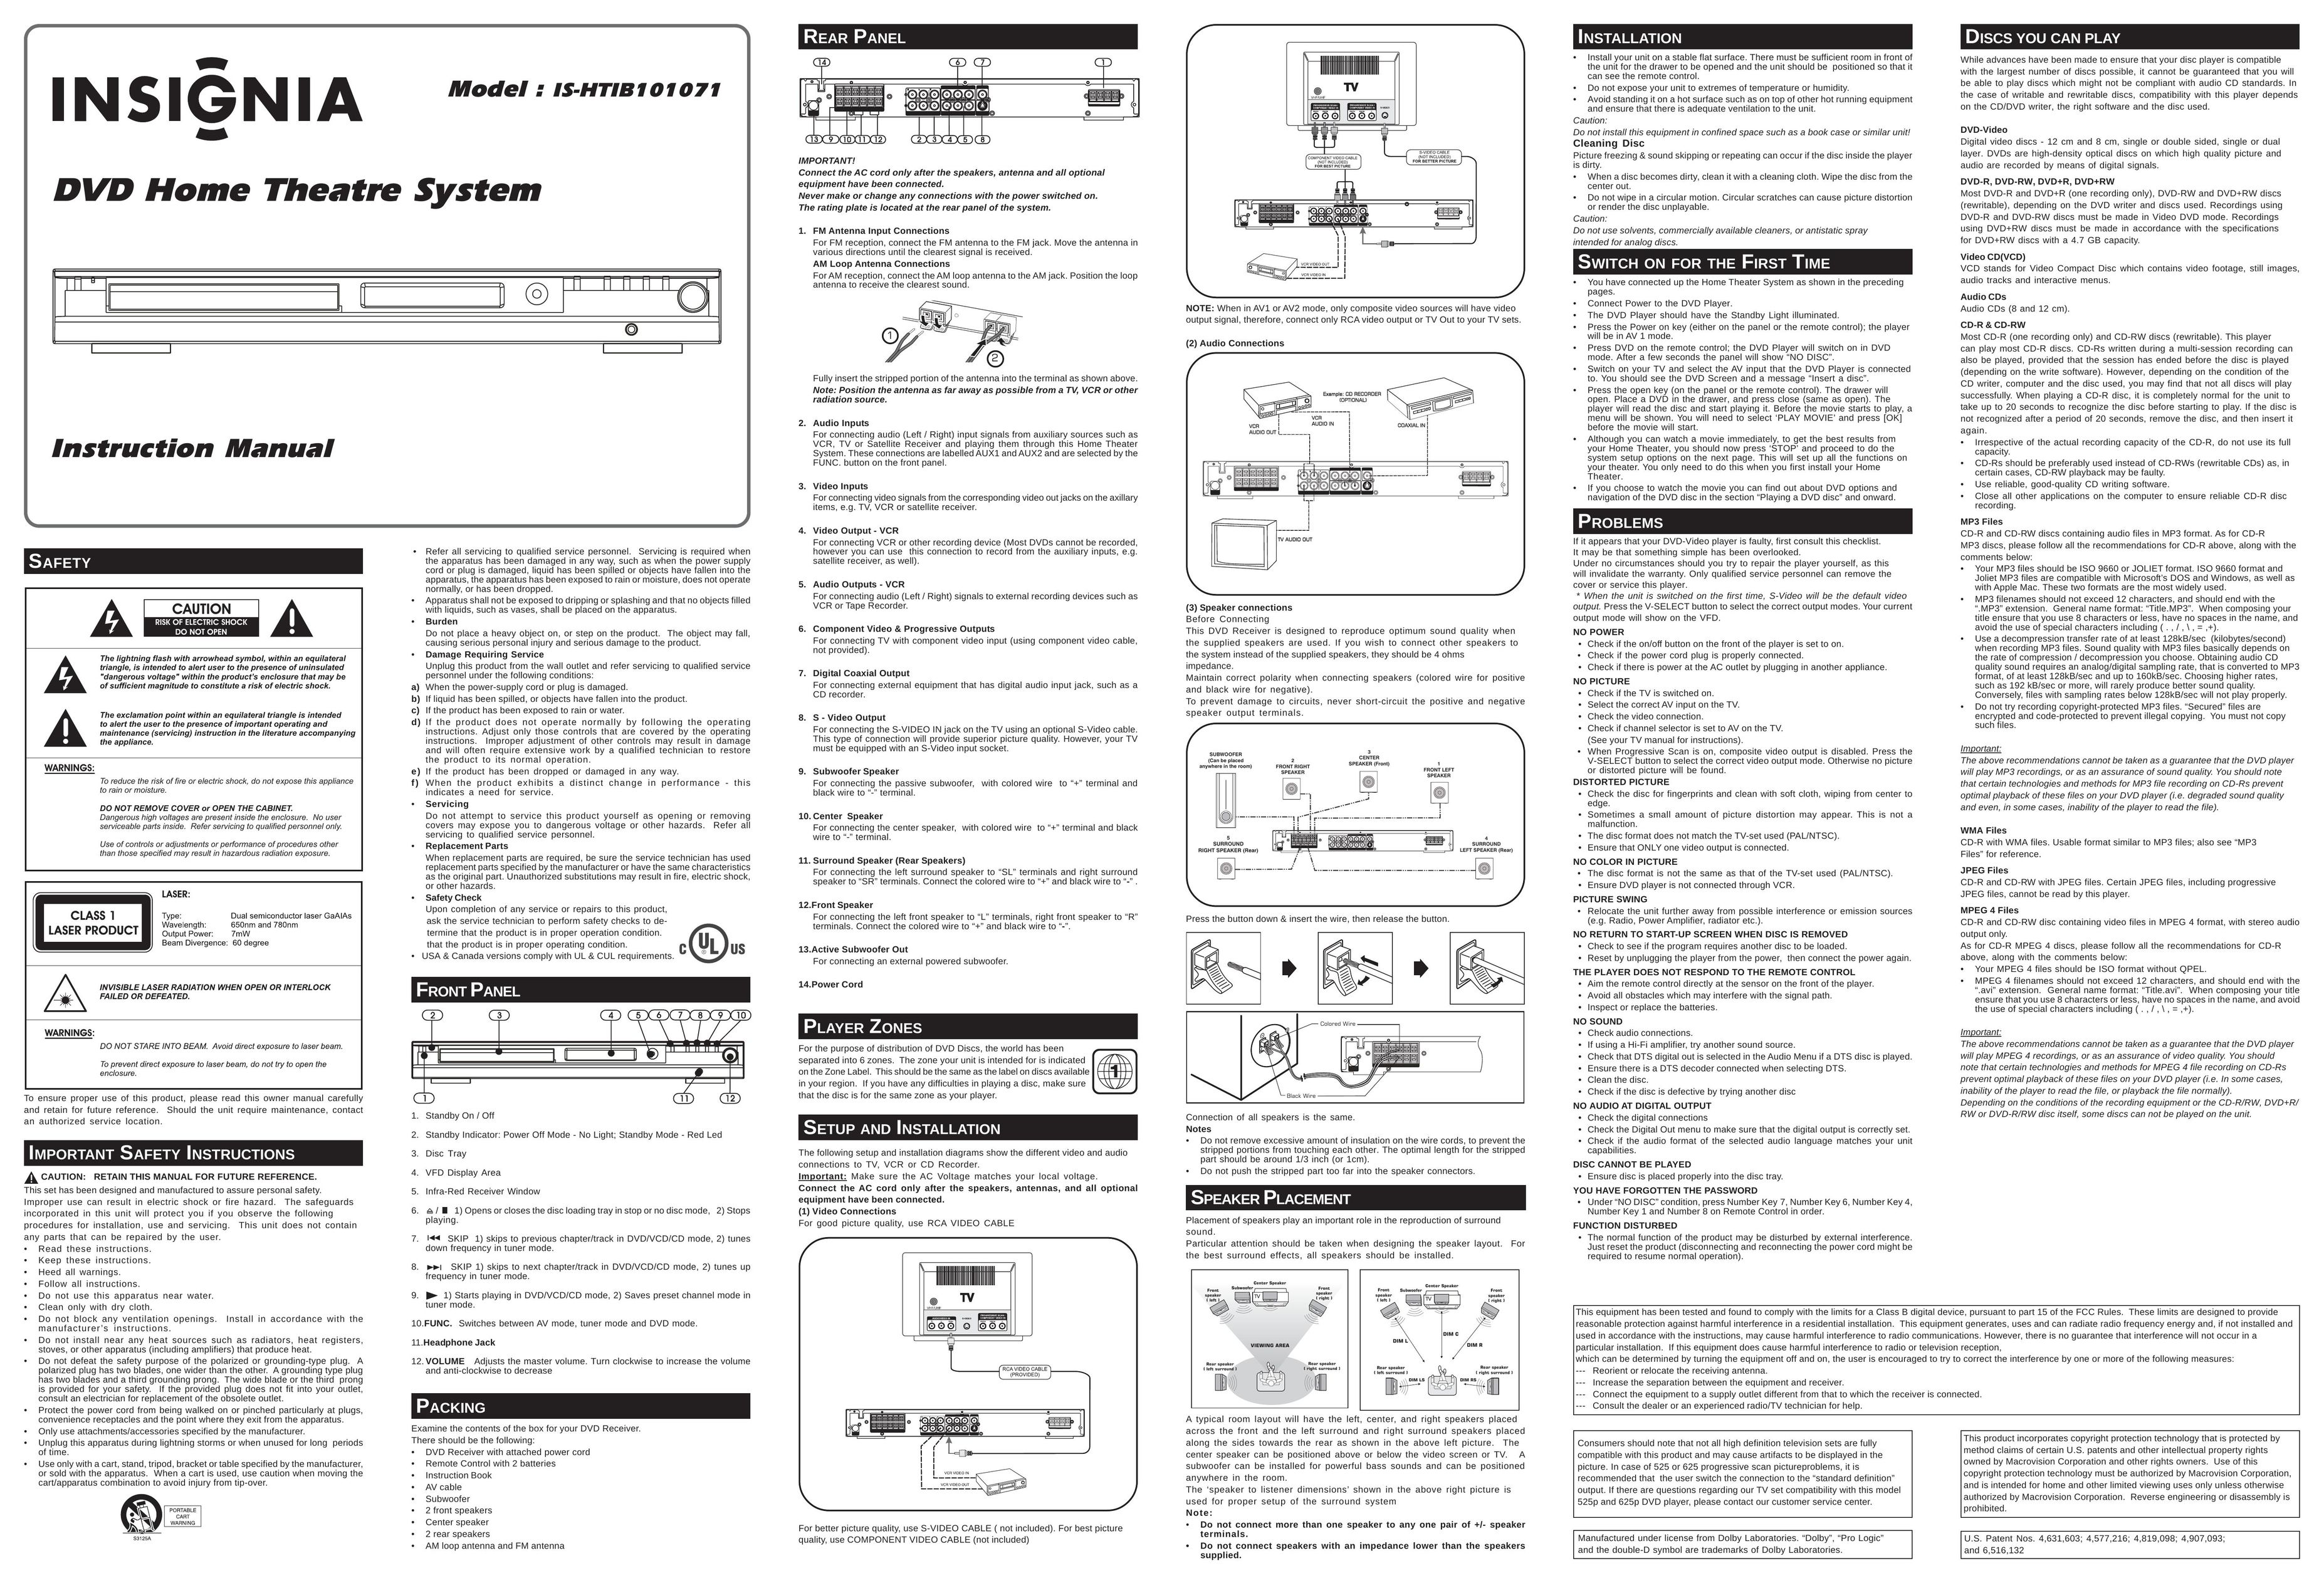 Insignia IS-HTIB101071 Home Theater System User Manual